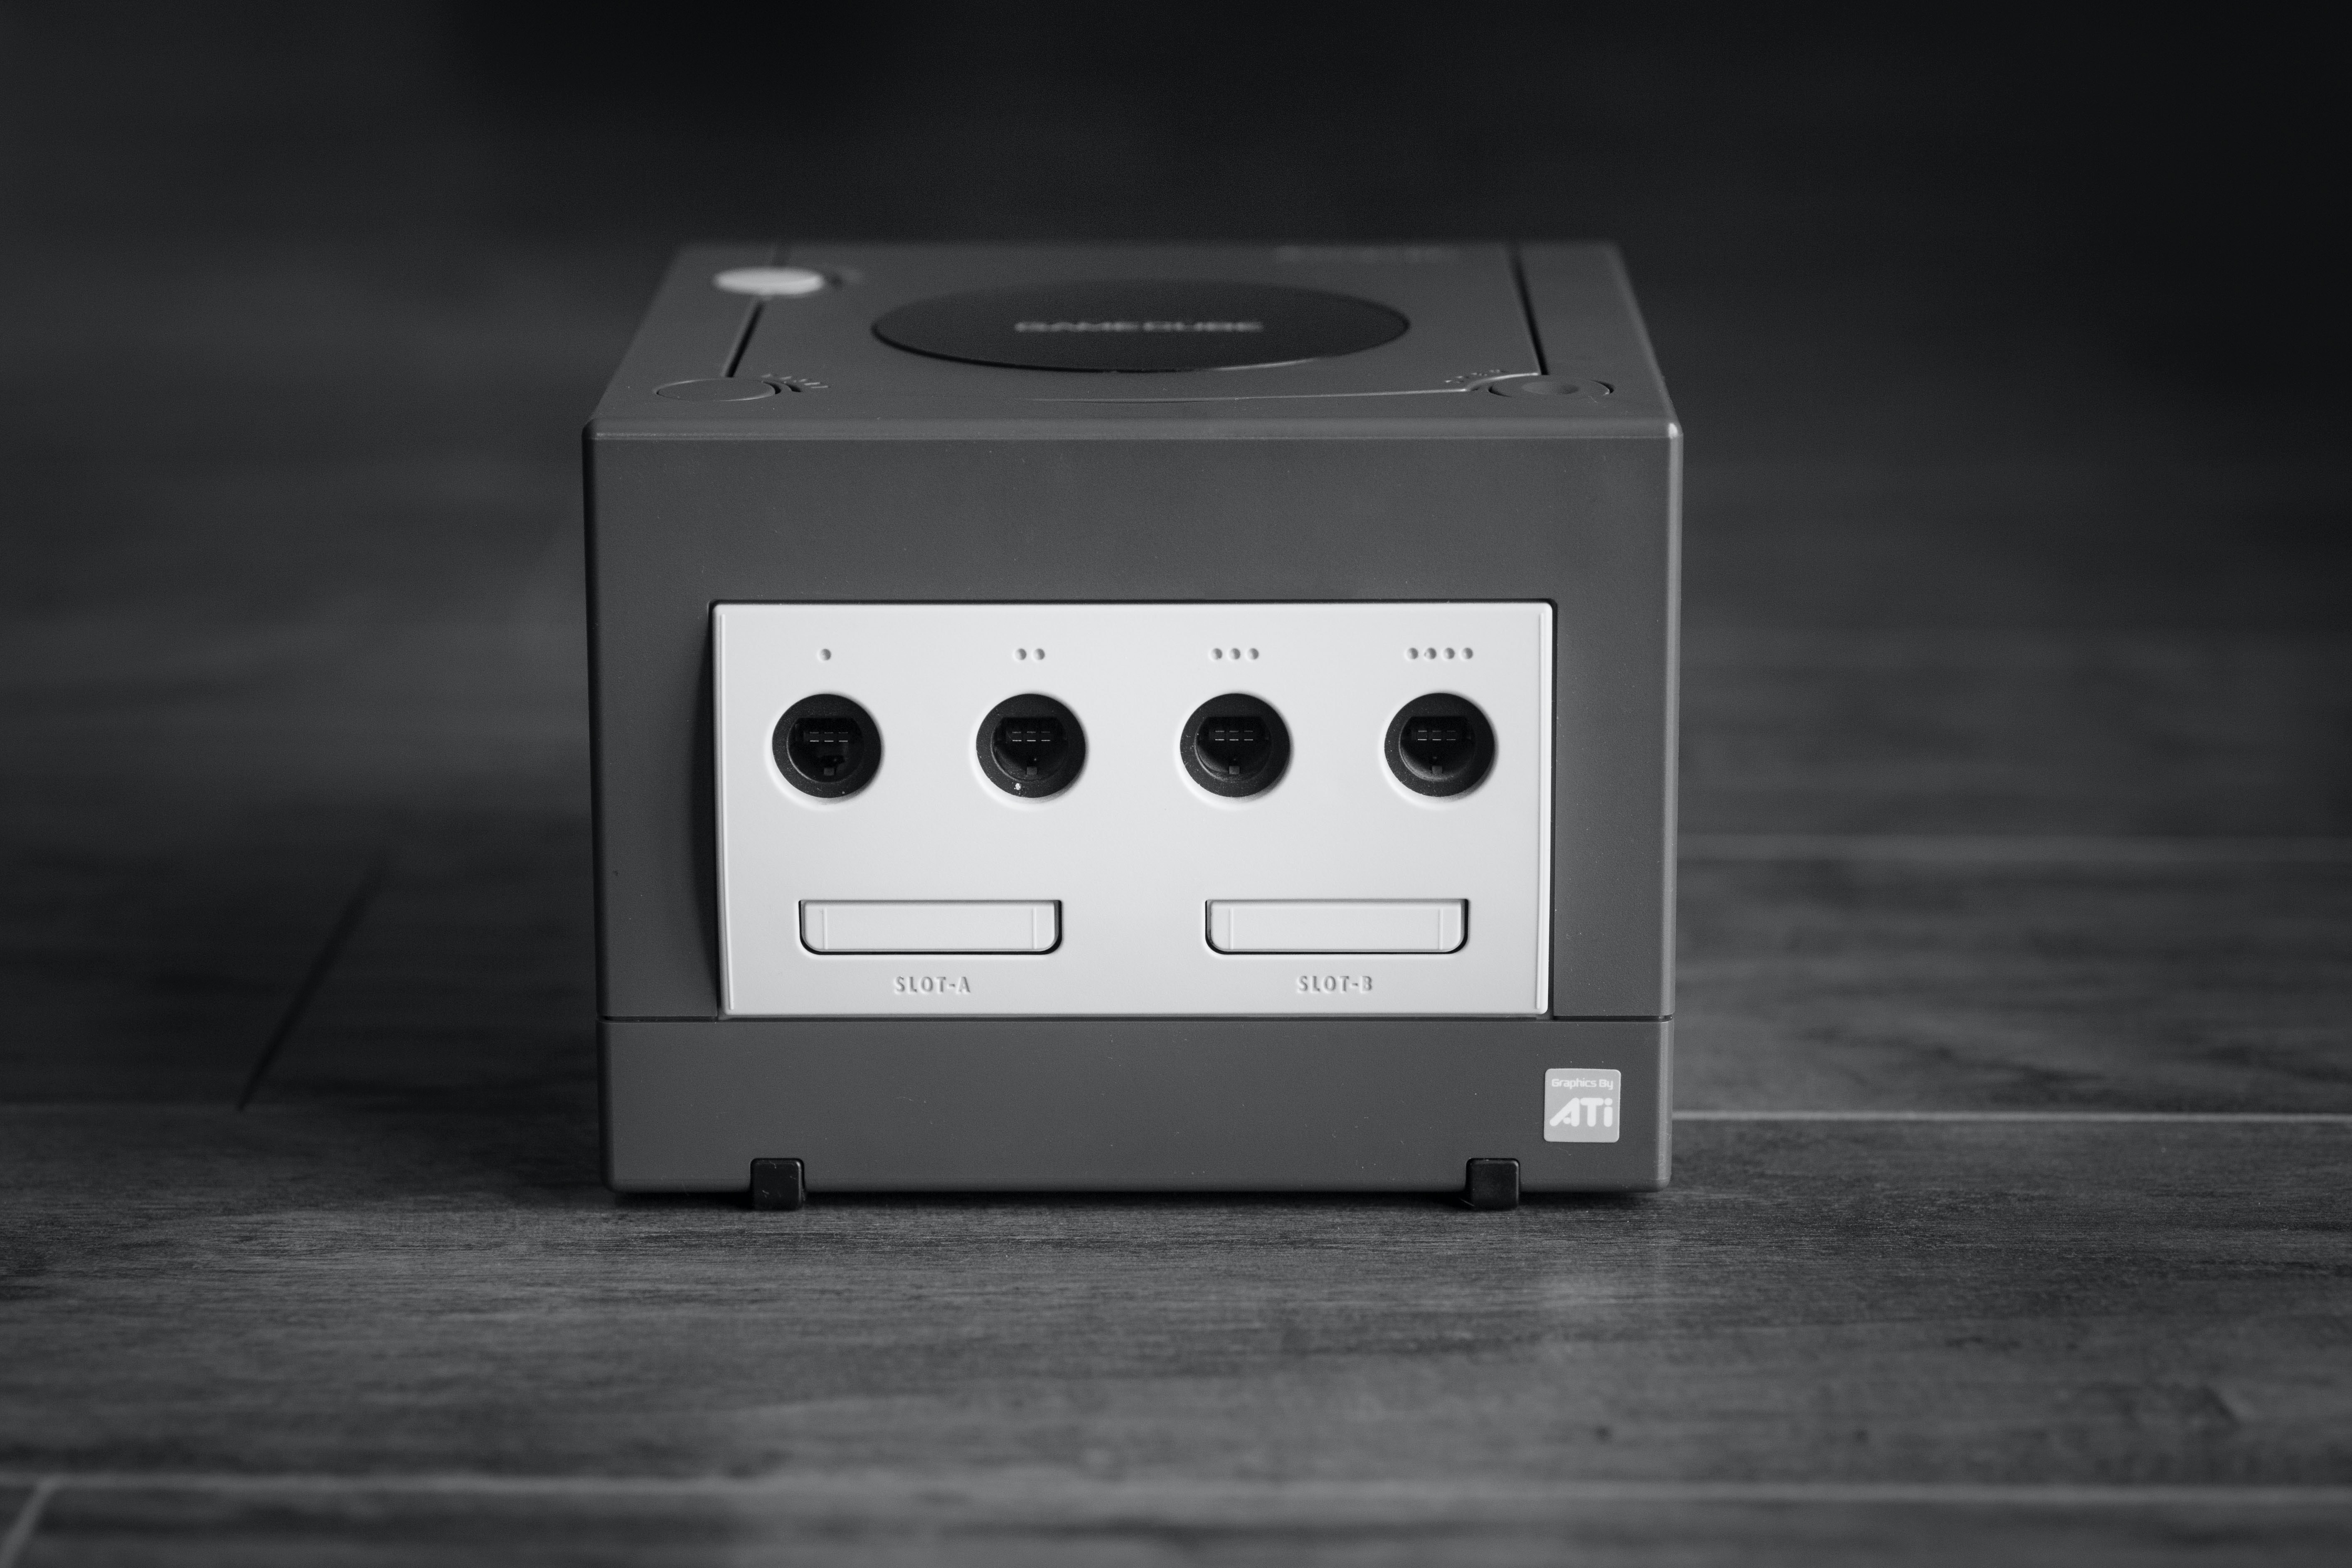 image of a nintendo gamecube games console